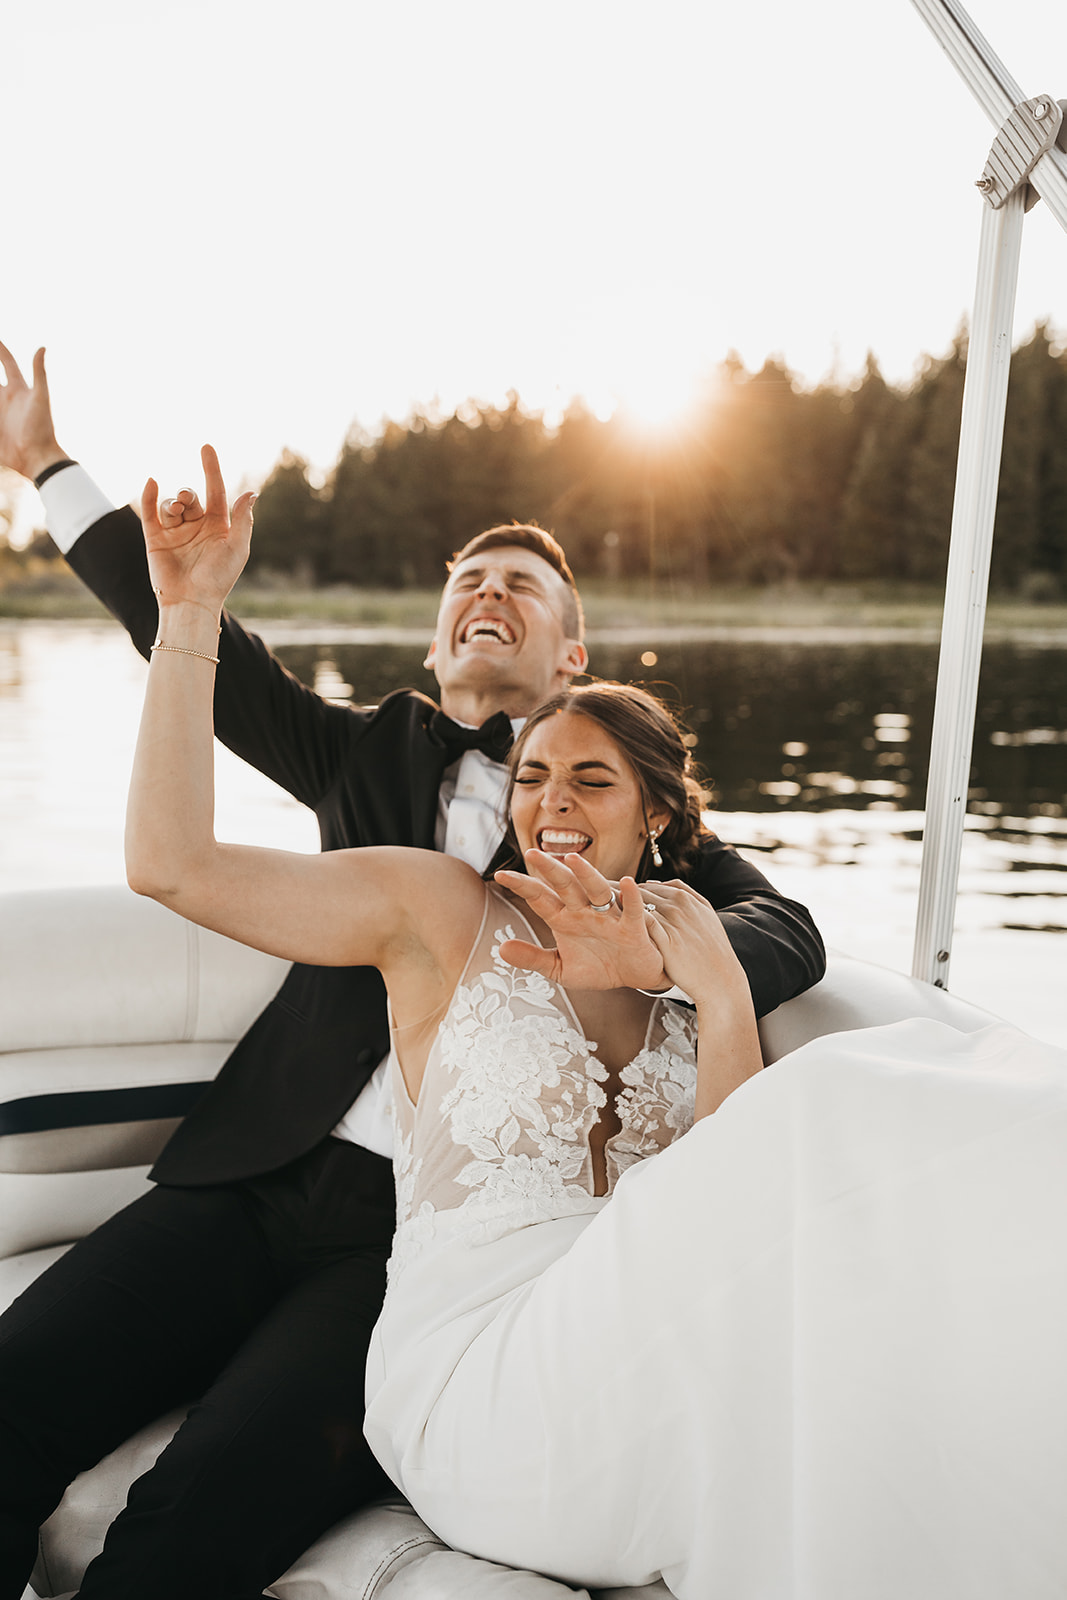 Bride and groom having fun on the family pontoon boat at private lake house wedding.